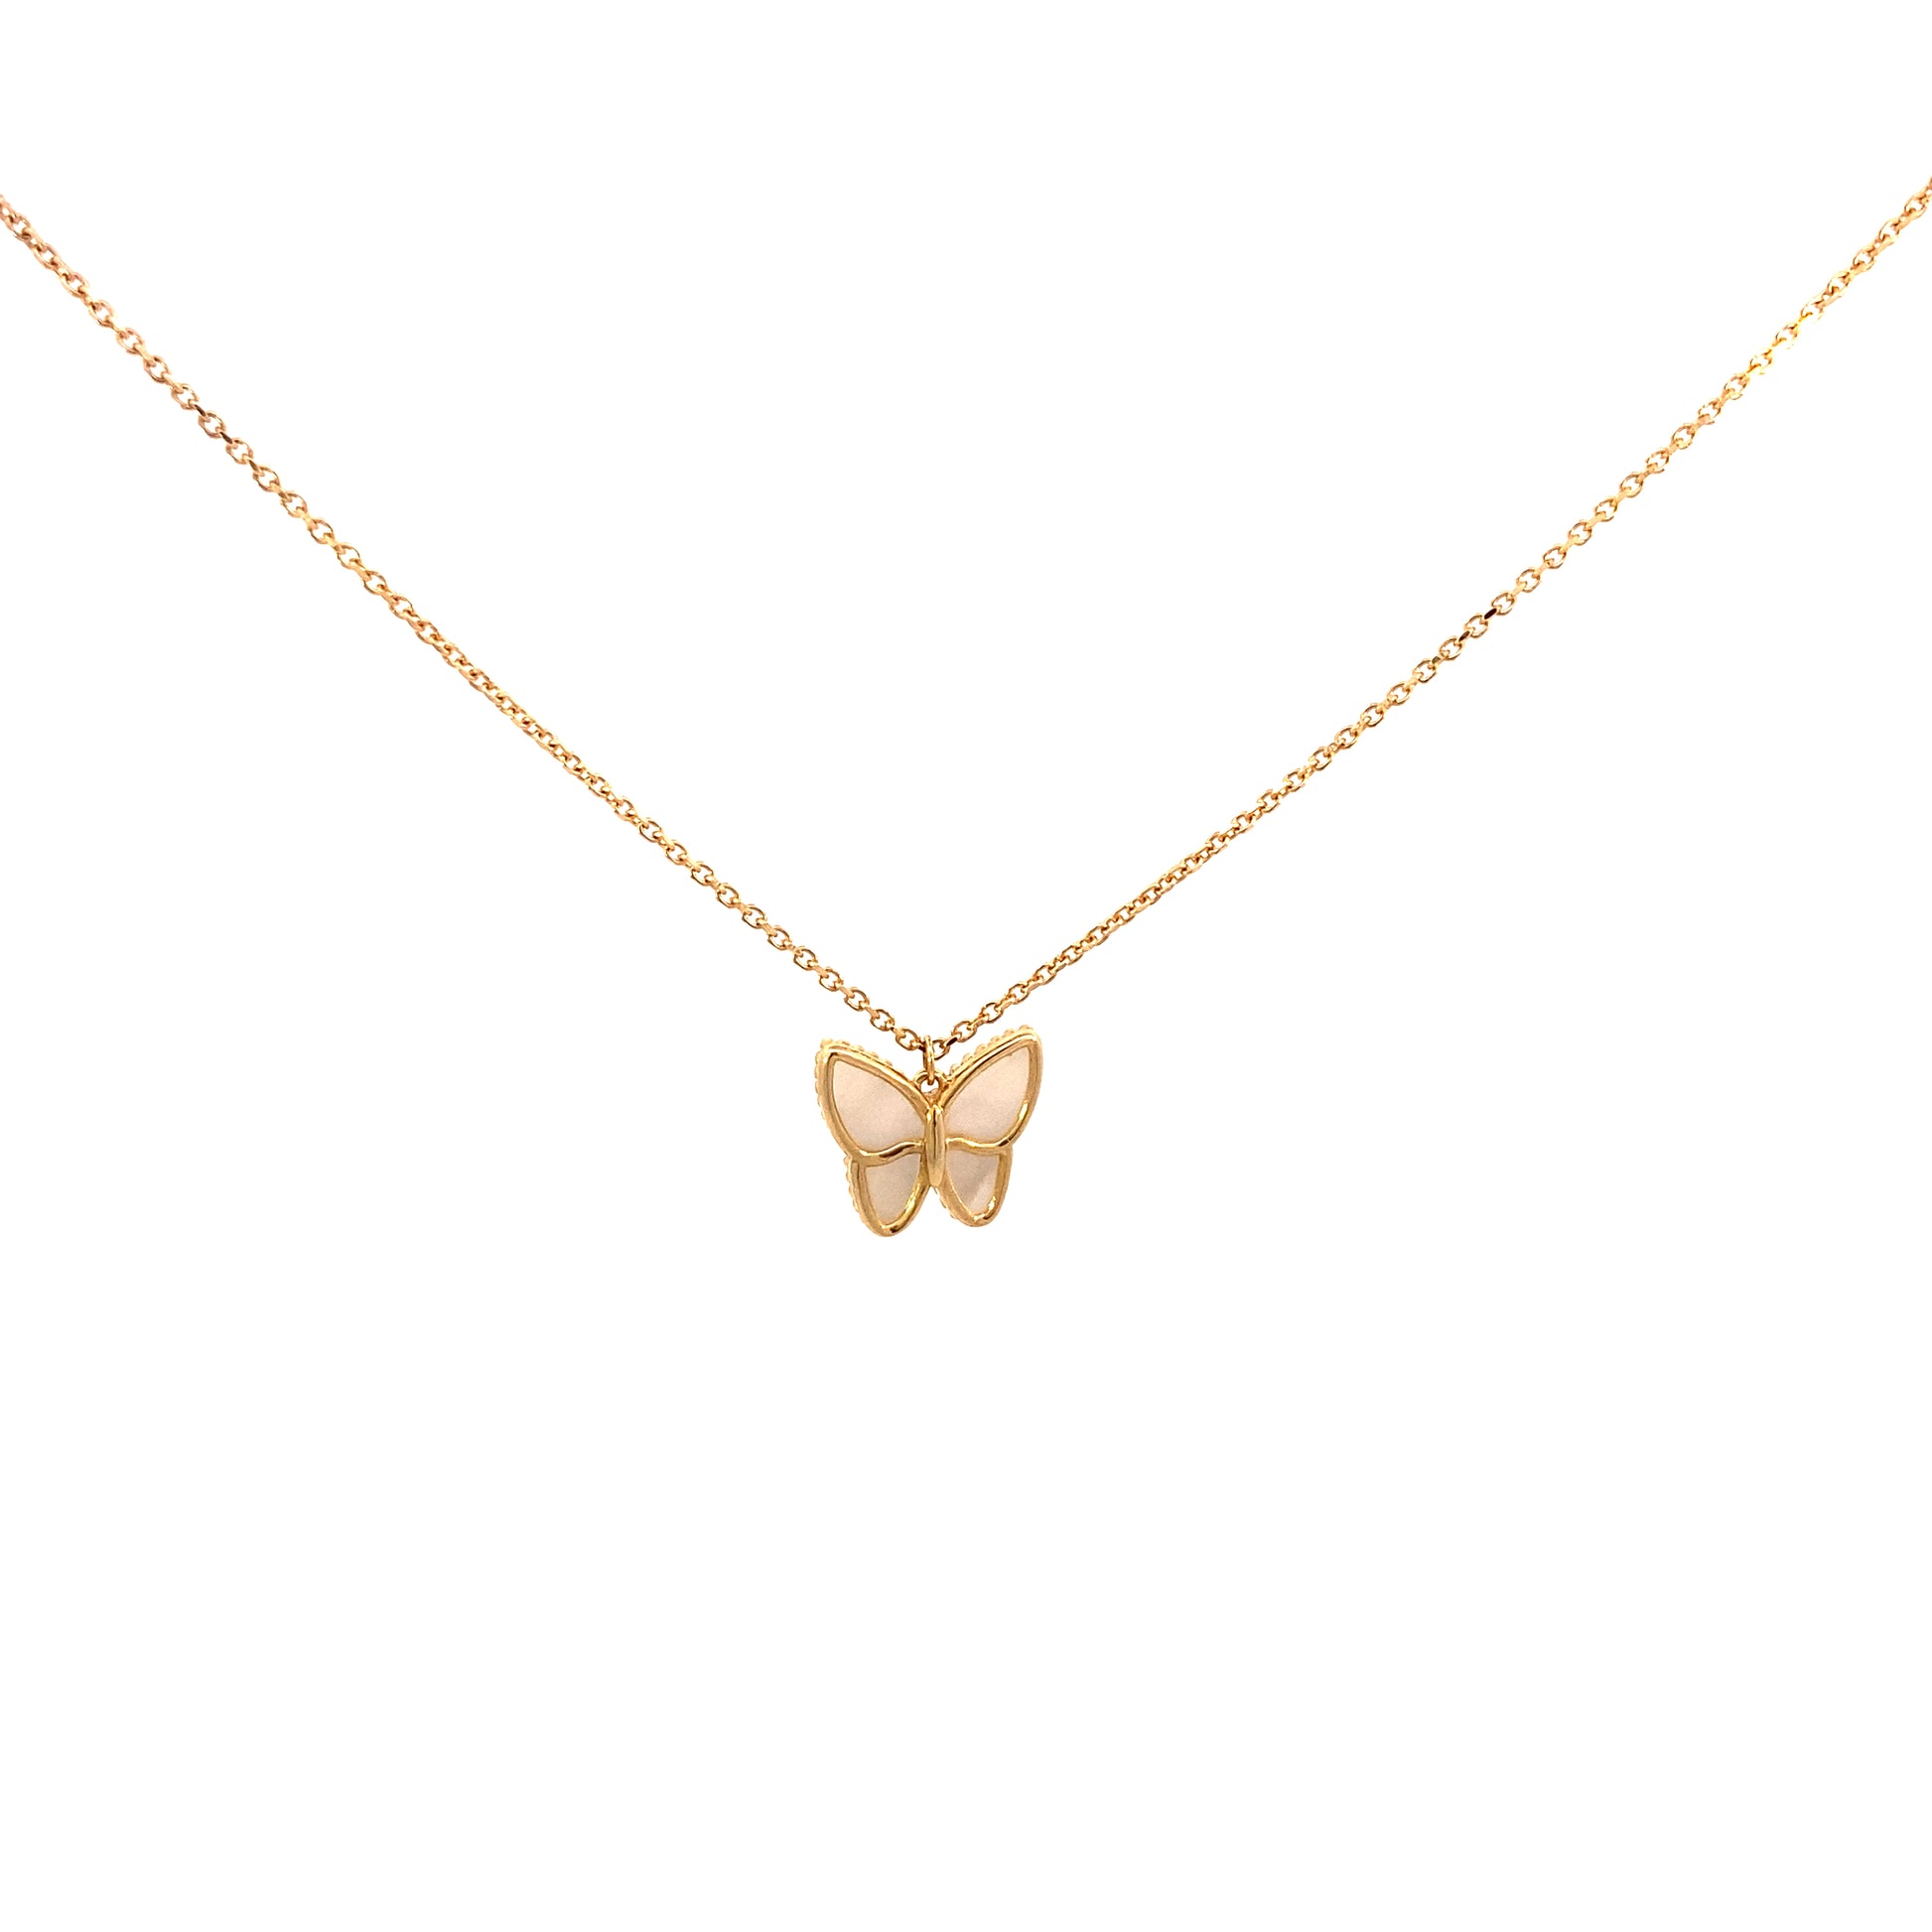 14K Gold Butterfly Necklace with Mother Pearl Shape | Luby Gold Collection | Luby 